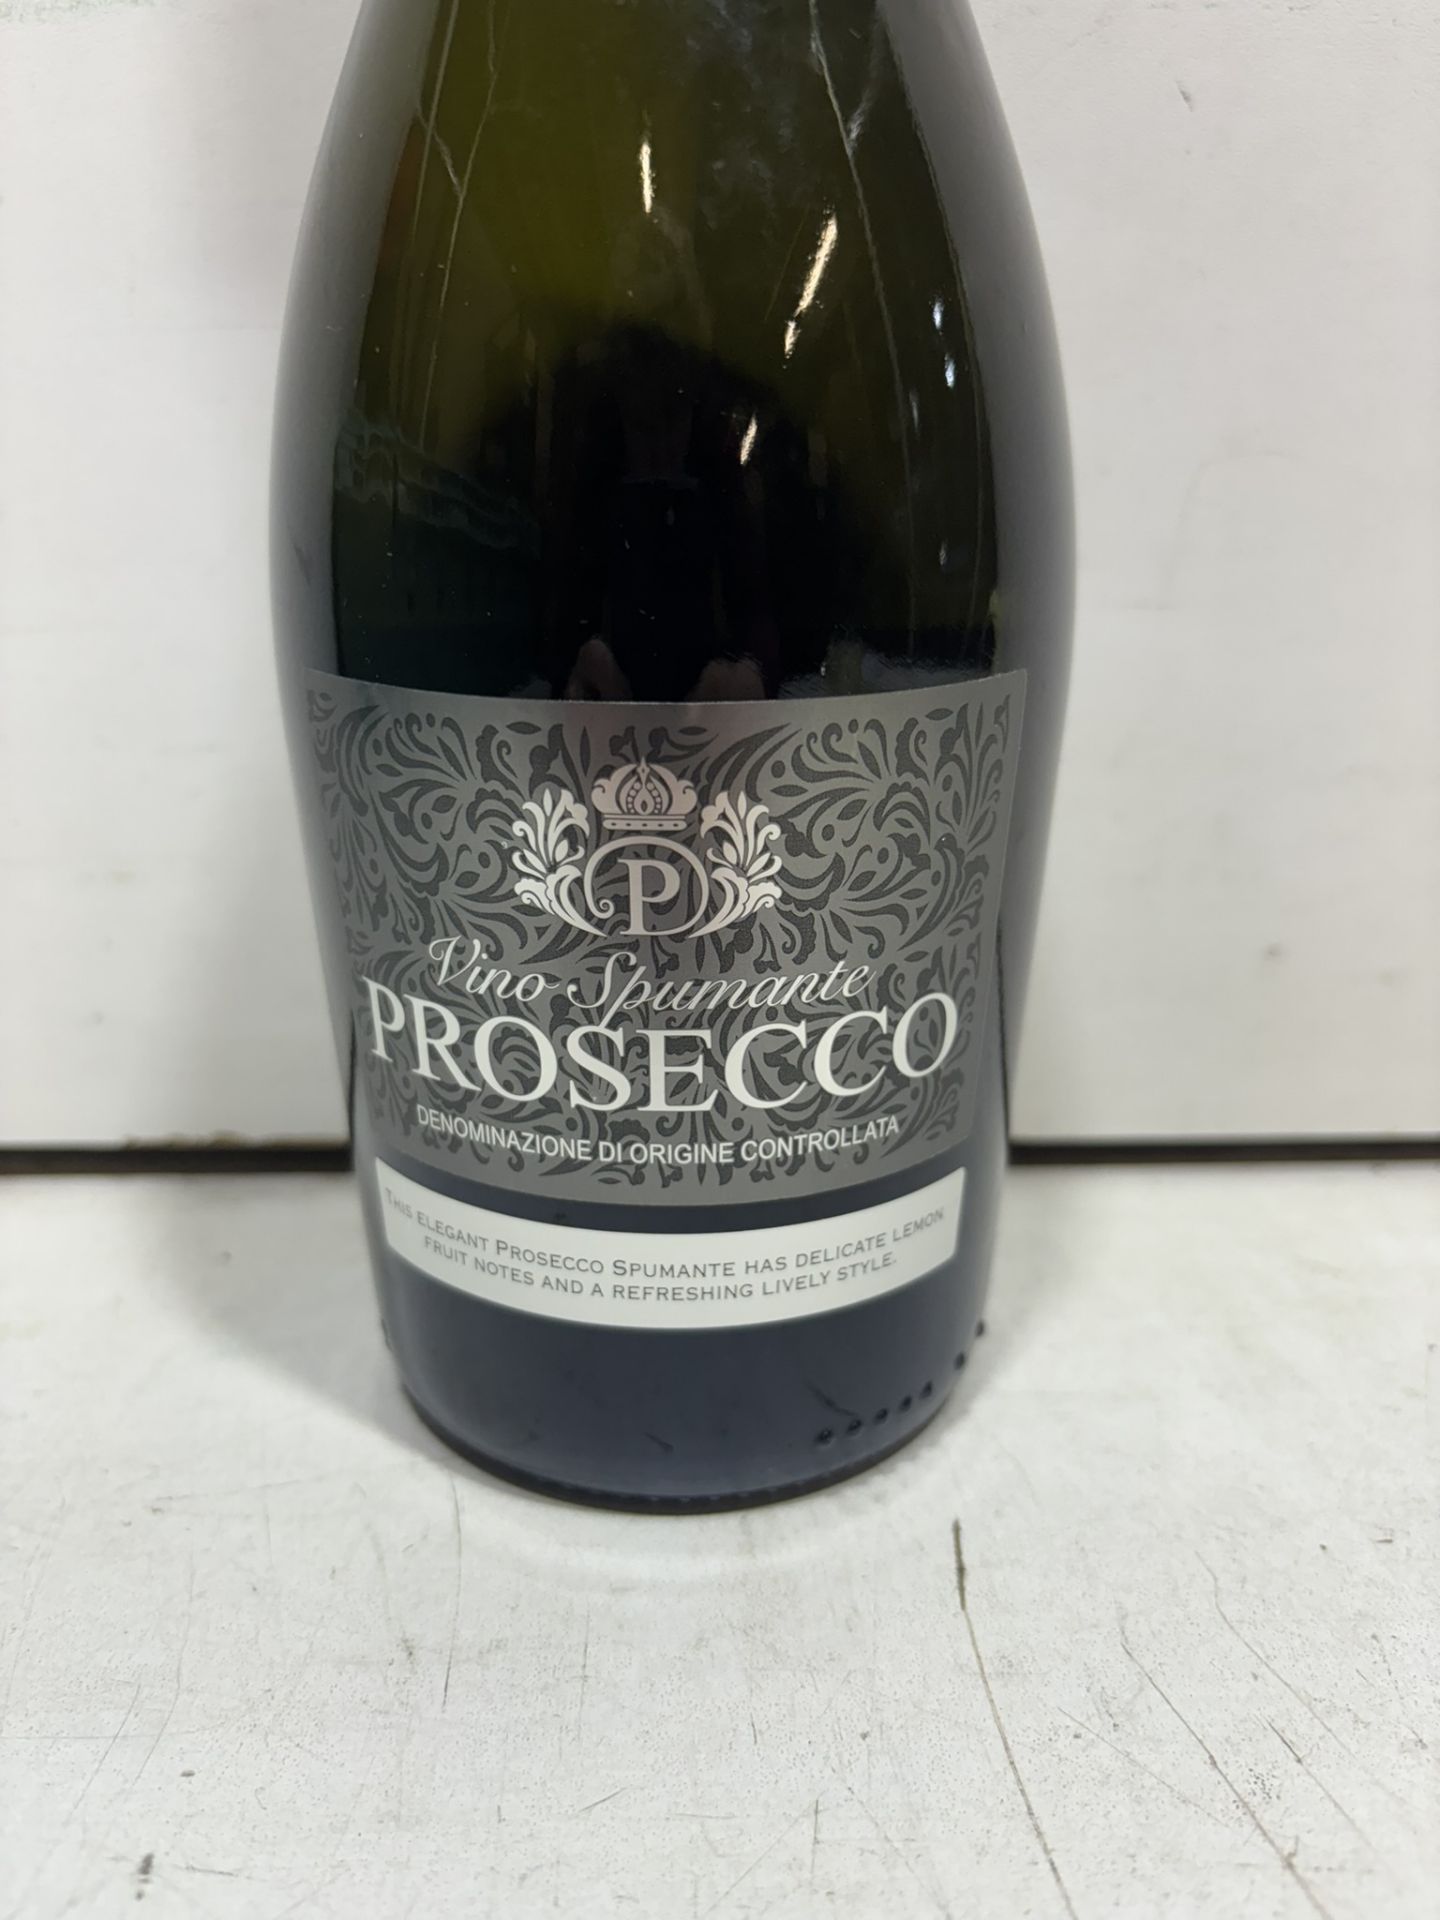 7 X Bottles Of Prosecco Vino Spumante Extra Dry 75Cl - Image 2 of 4